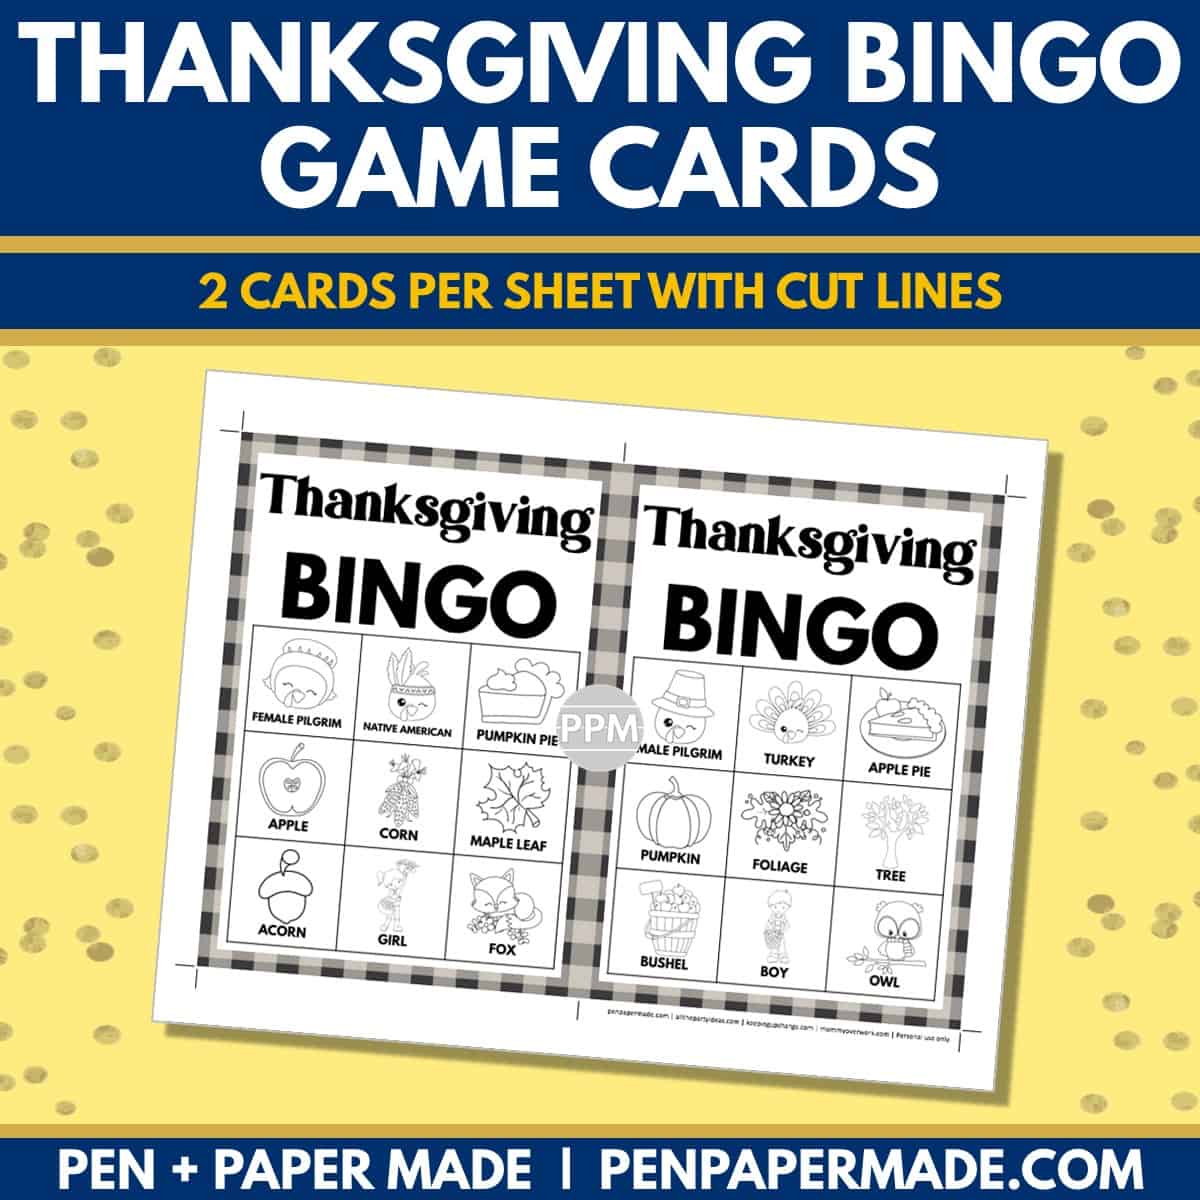 thanksgiving bingo card 3x3 5x7 game boards with images and text words.